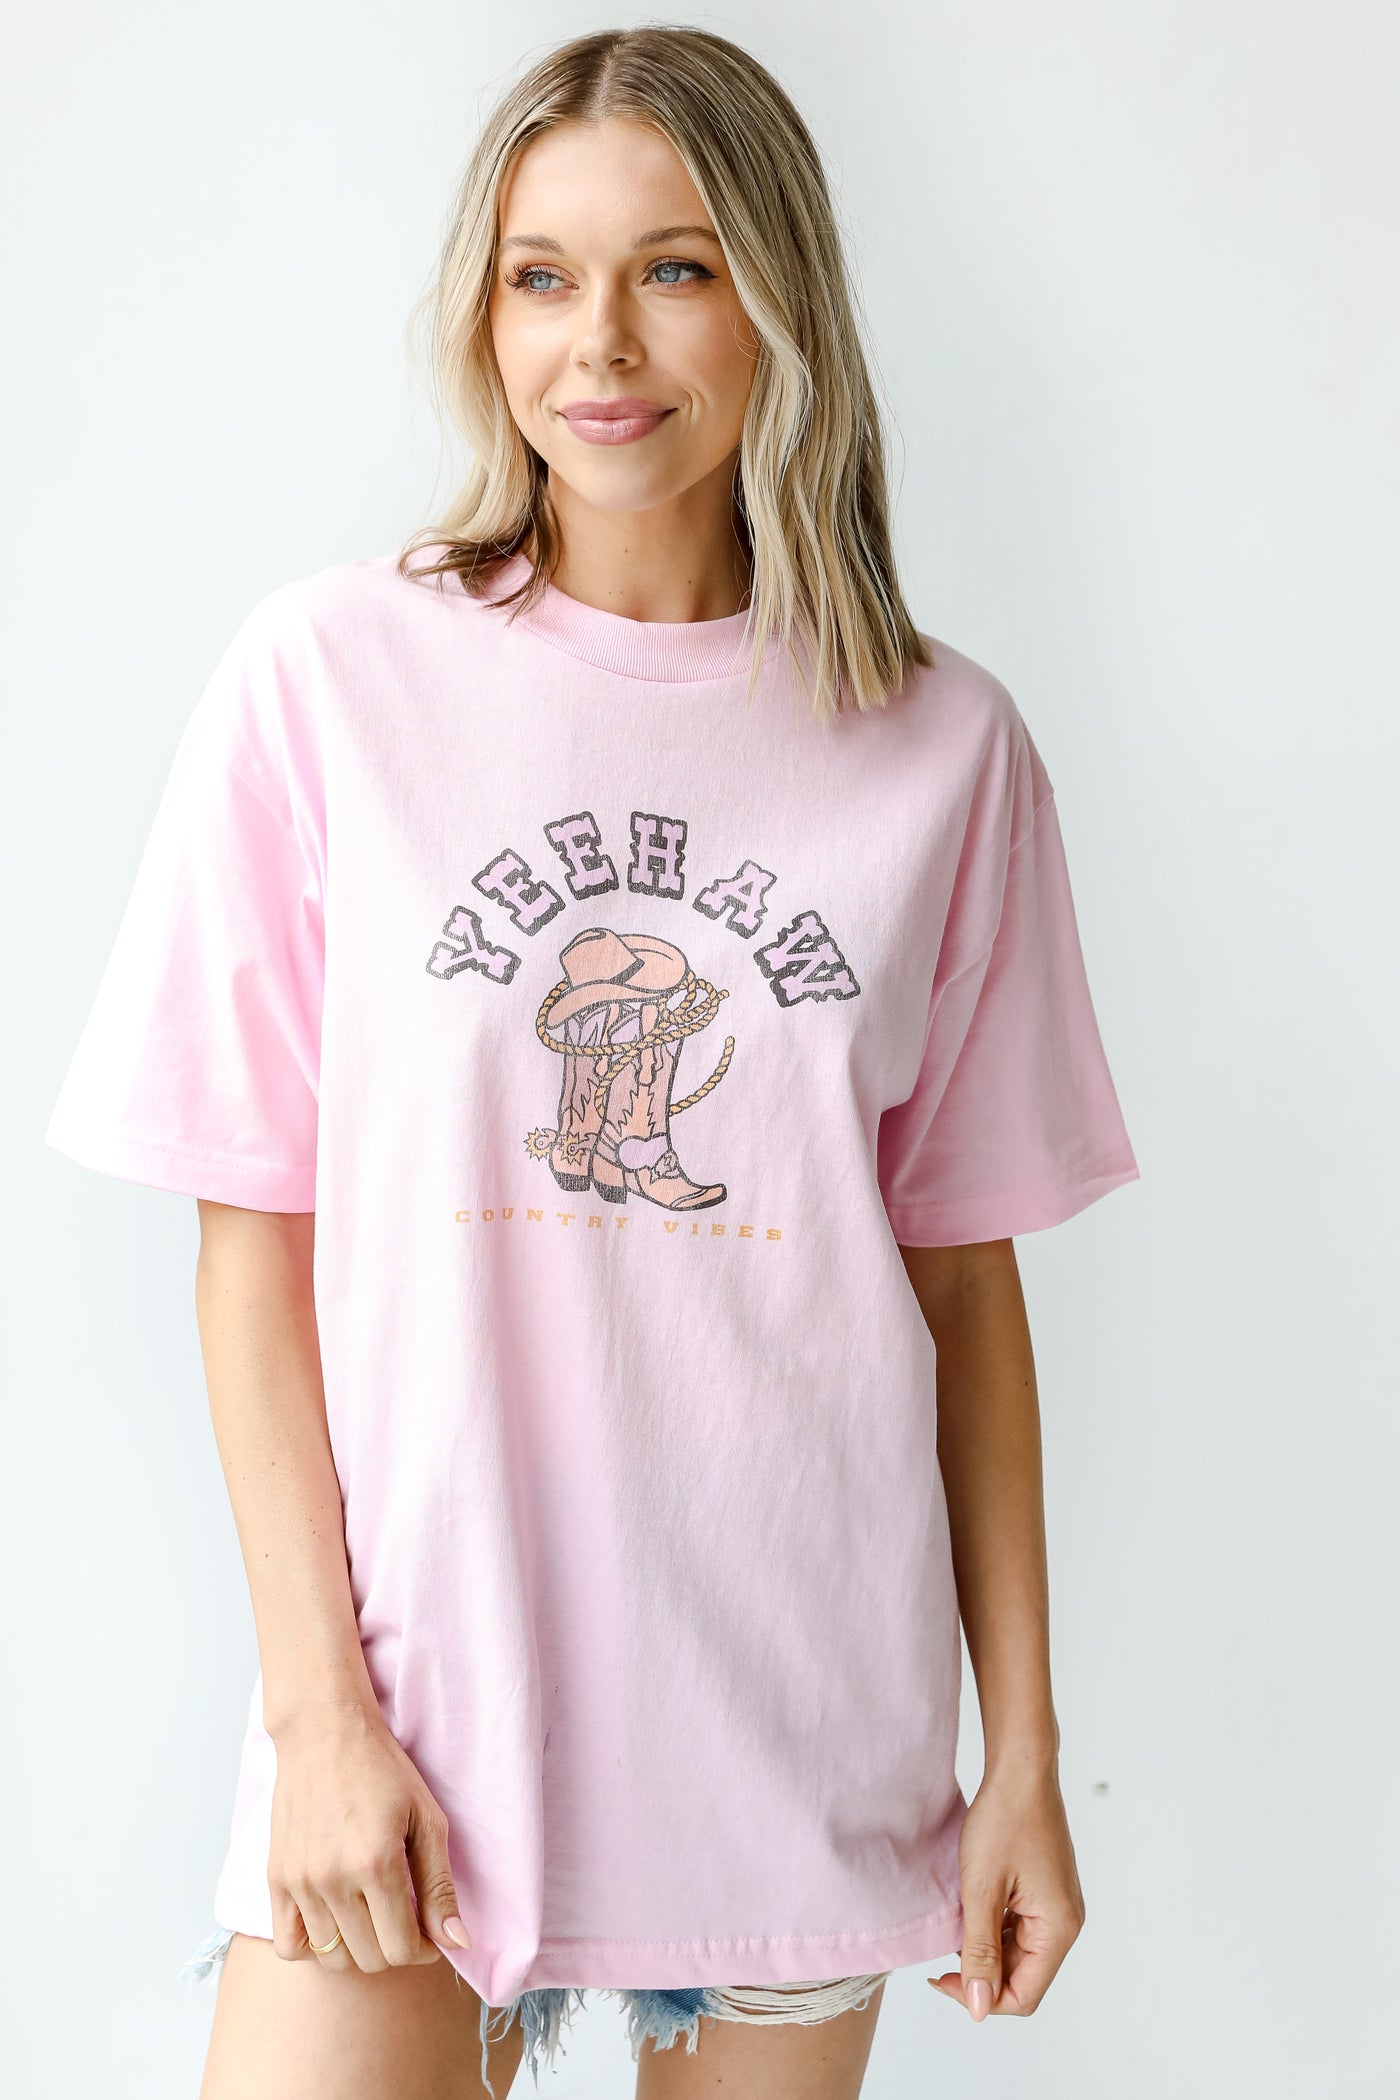 Yeehaw Country Vibes Graphic Tee on model